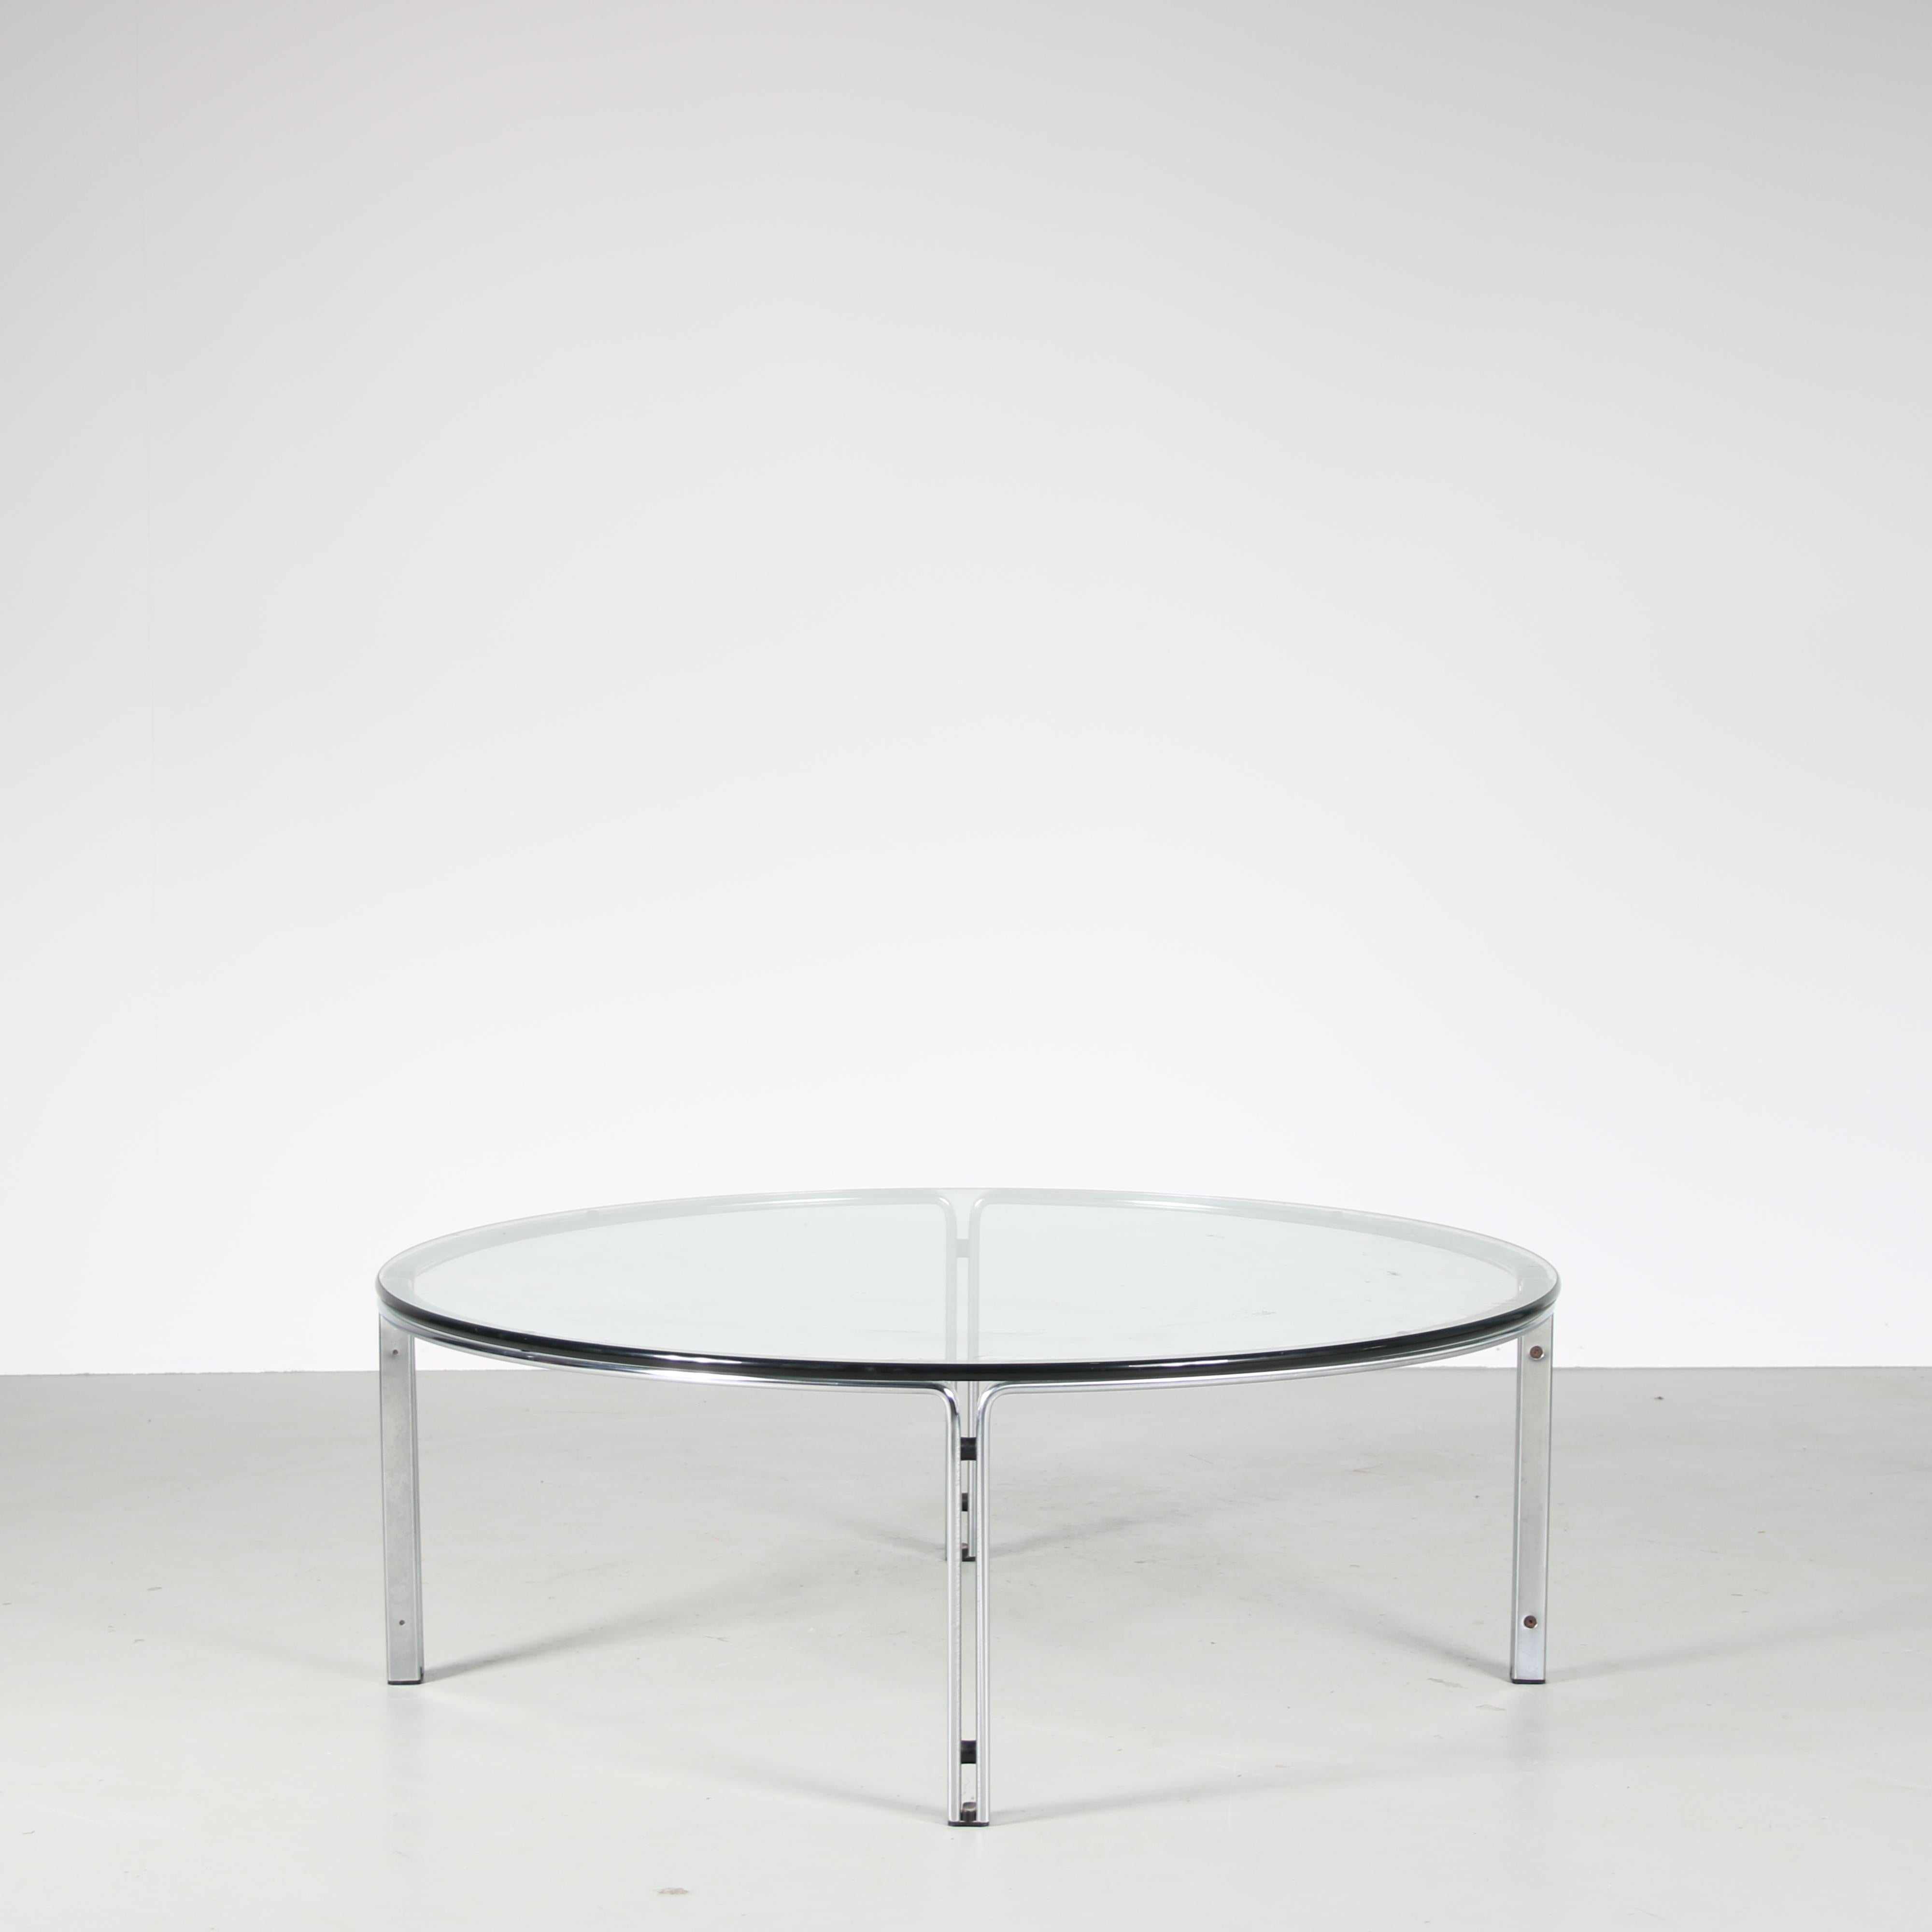 A beautiful coffee table designed by Horst Brüning, manufactured by Kill International in Germany around 1960.

This high quality piece features a steel base with a thick glass top. The metal base is really nicely made, bent into shape to smoothly